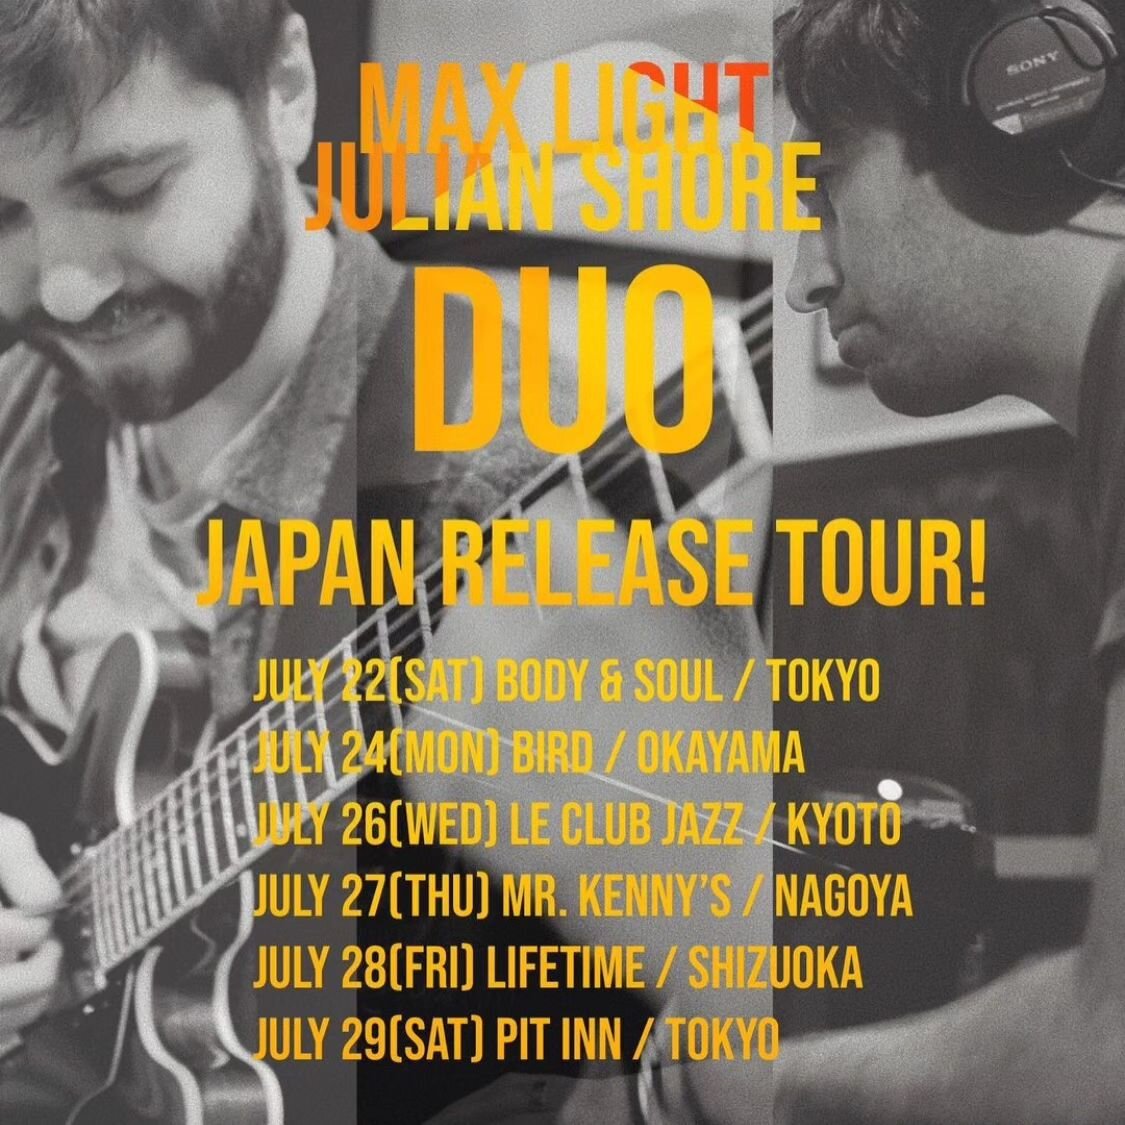 TOMORROW I fly to JAPAN with @jshore22 to play a bunch of shows and eat as much food as I can. Thanks so much to the amazing @kawakamikohei for putting this all together. I'm also so excited and grateful to be playing a guitar built by the great Masa